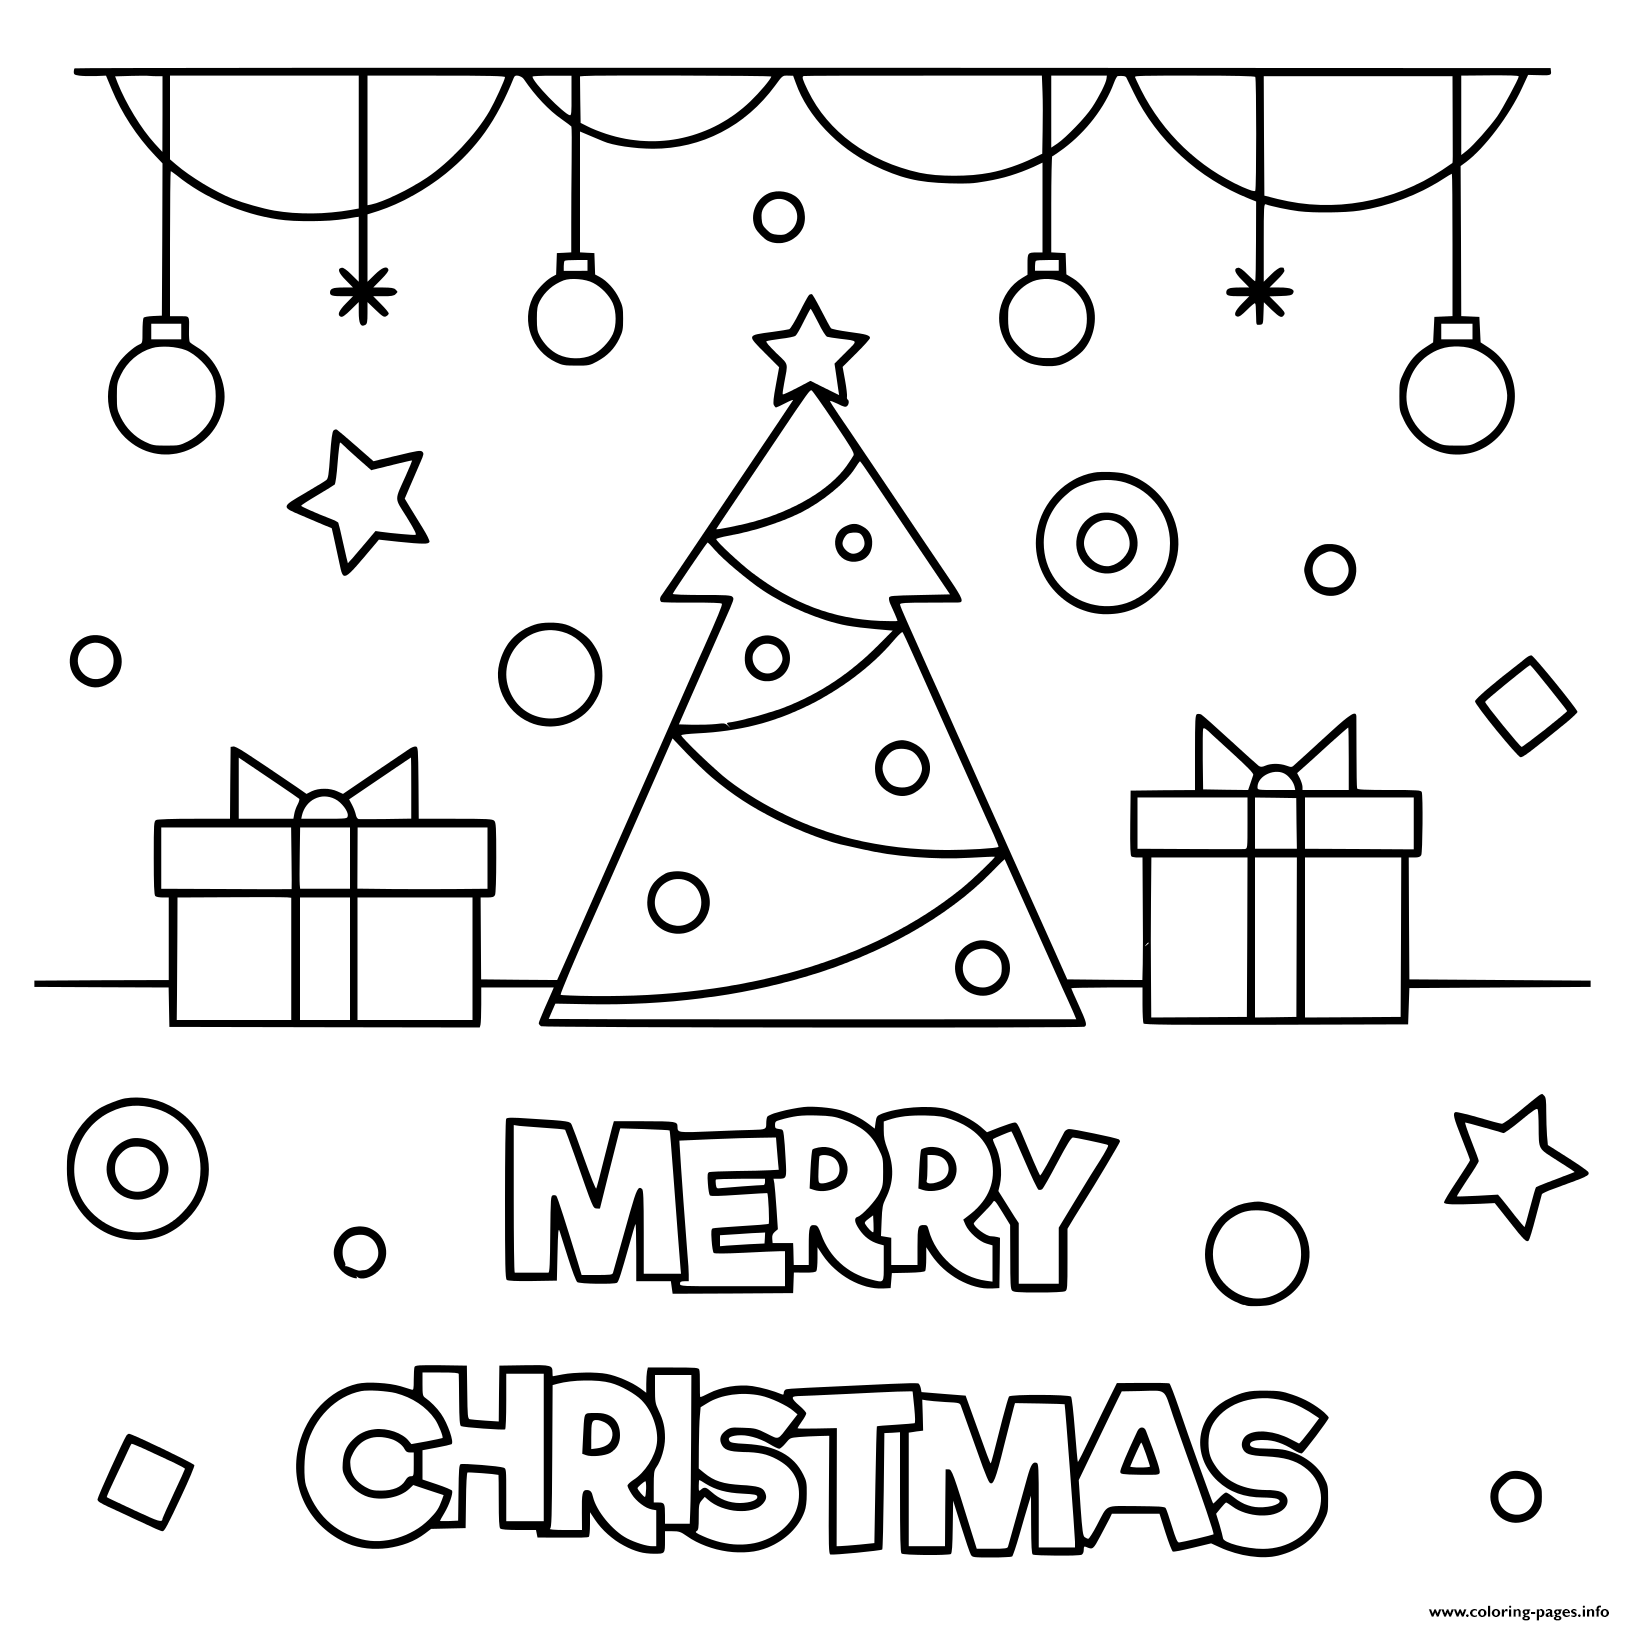 Merry Christmas Tree With Decorations December 24 coloring